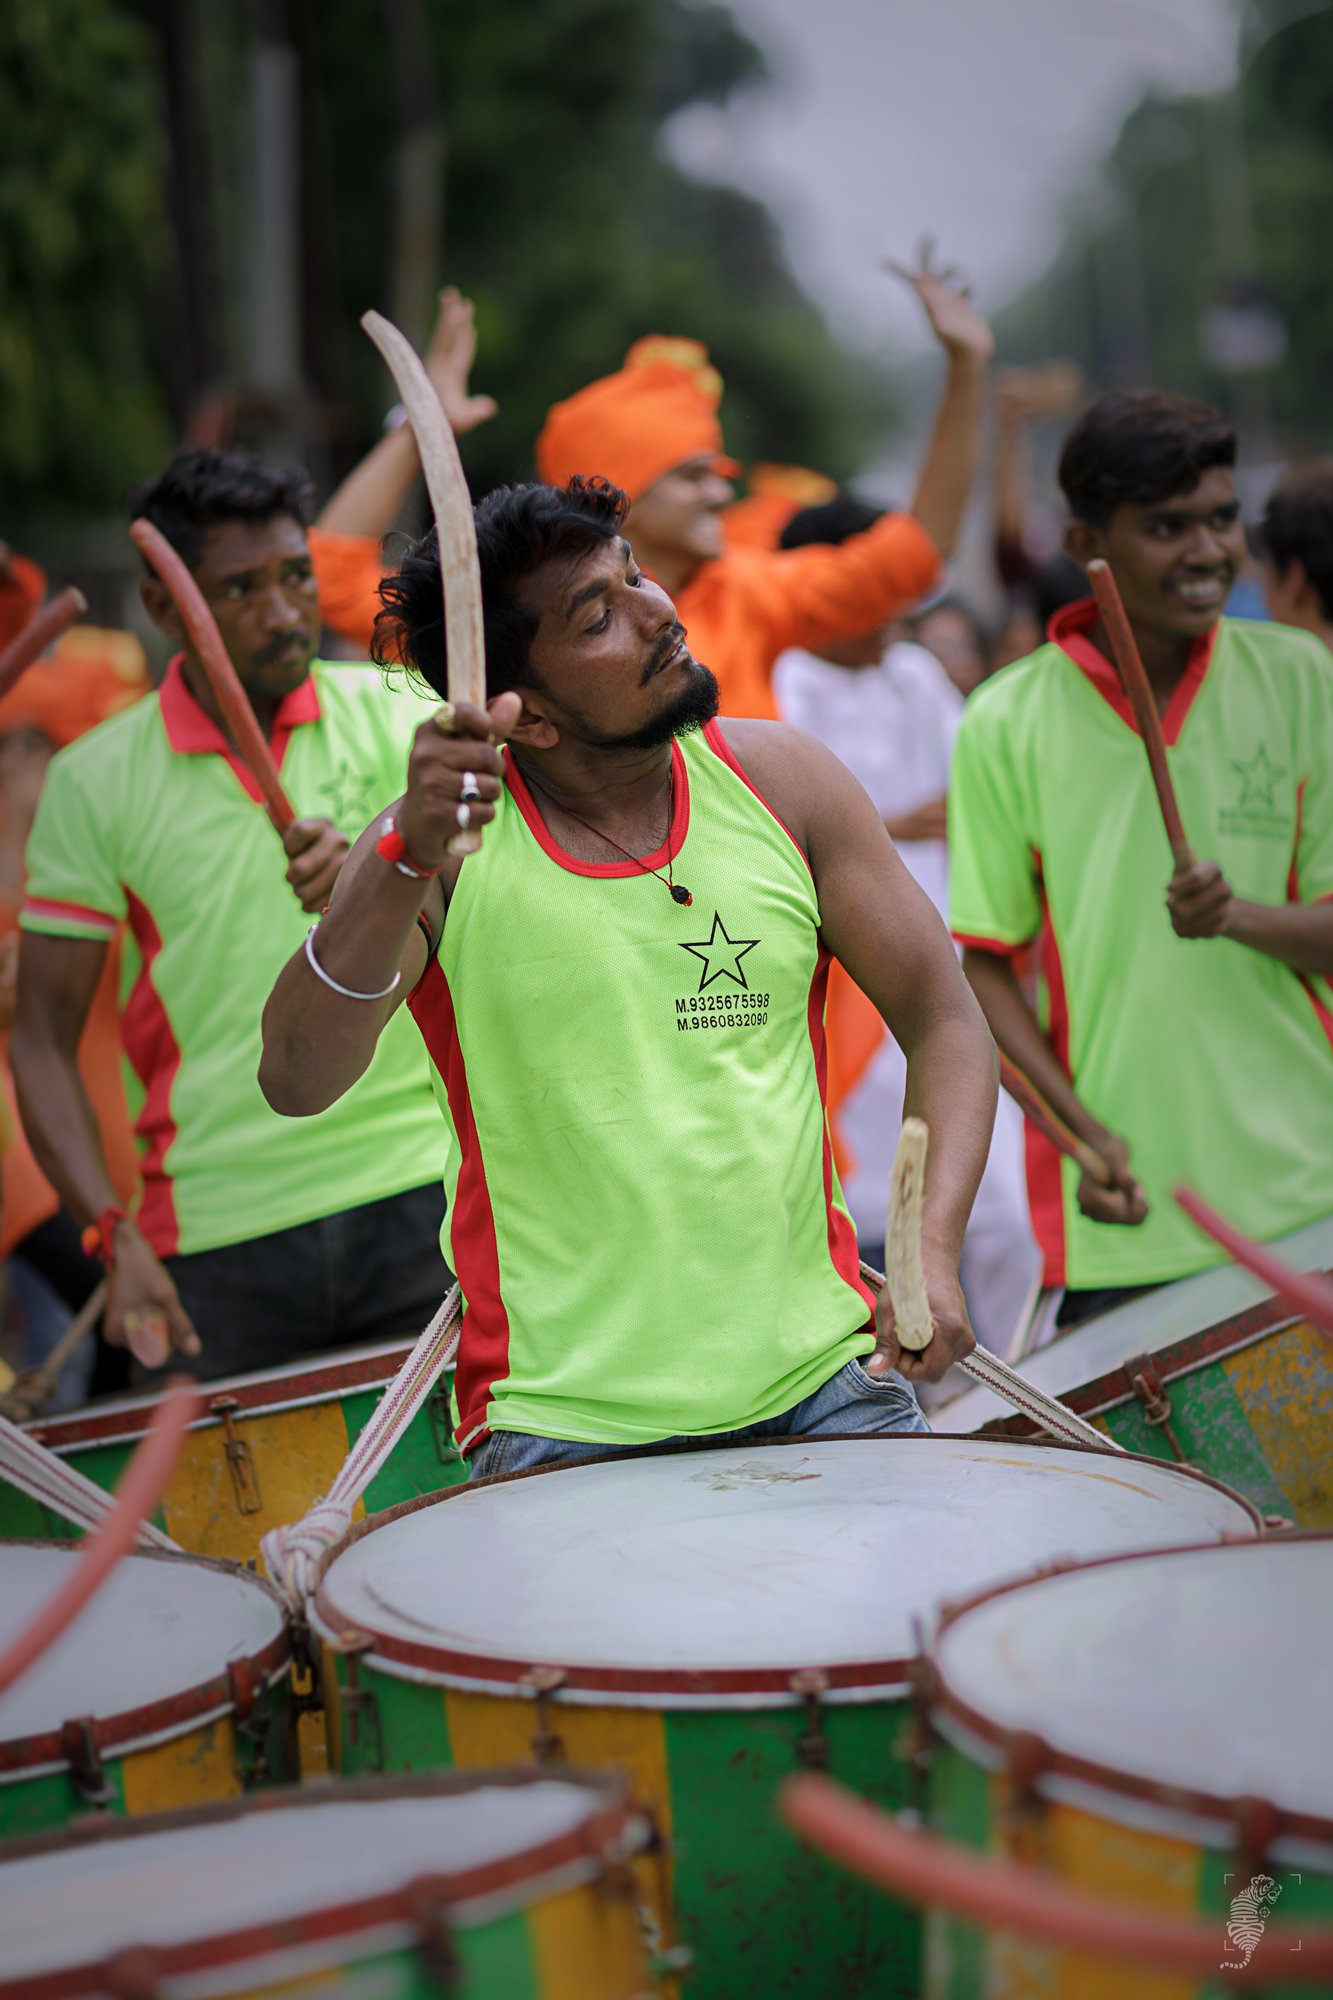 #india #canon #ganeshfestival #drums #player #candid #street #male, Abhijit D